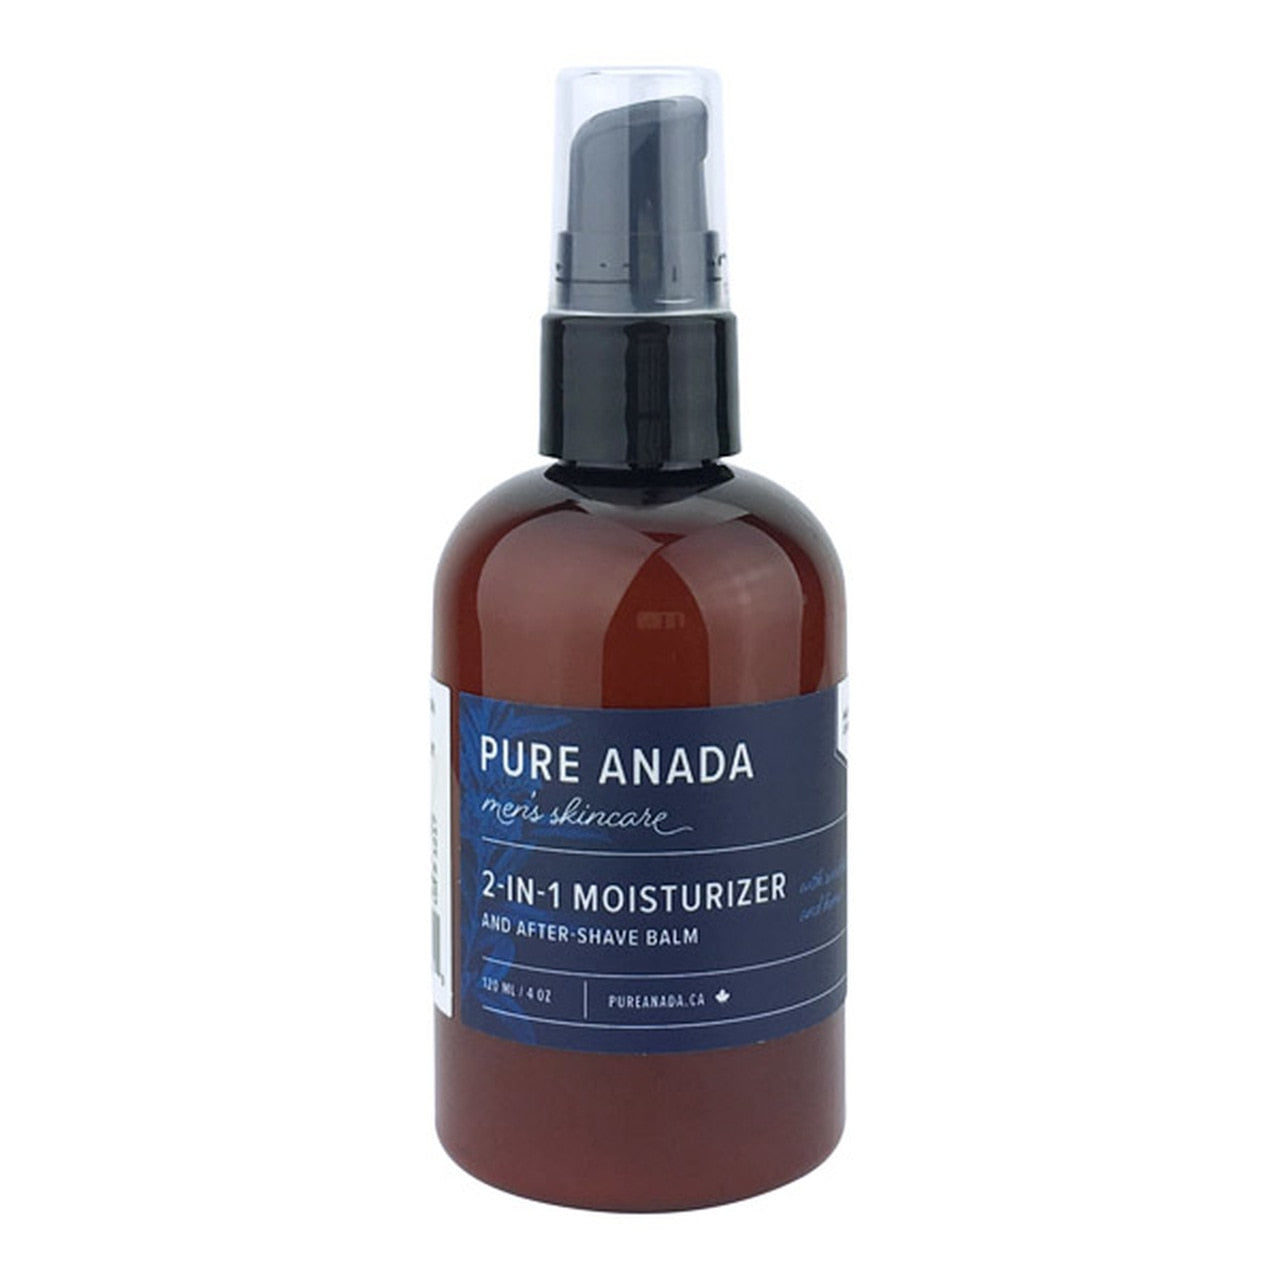 Pure Anada - 2-in1 Moisturizer and After Shave Balm - all things being eco chilliwack canada - men's organic skincare